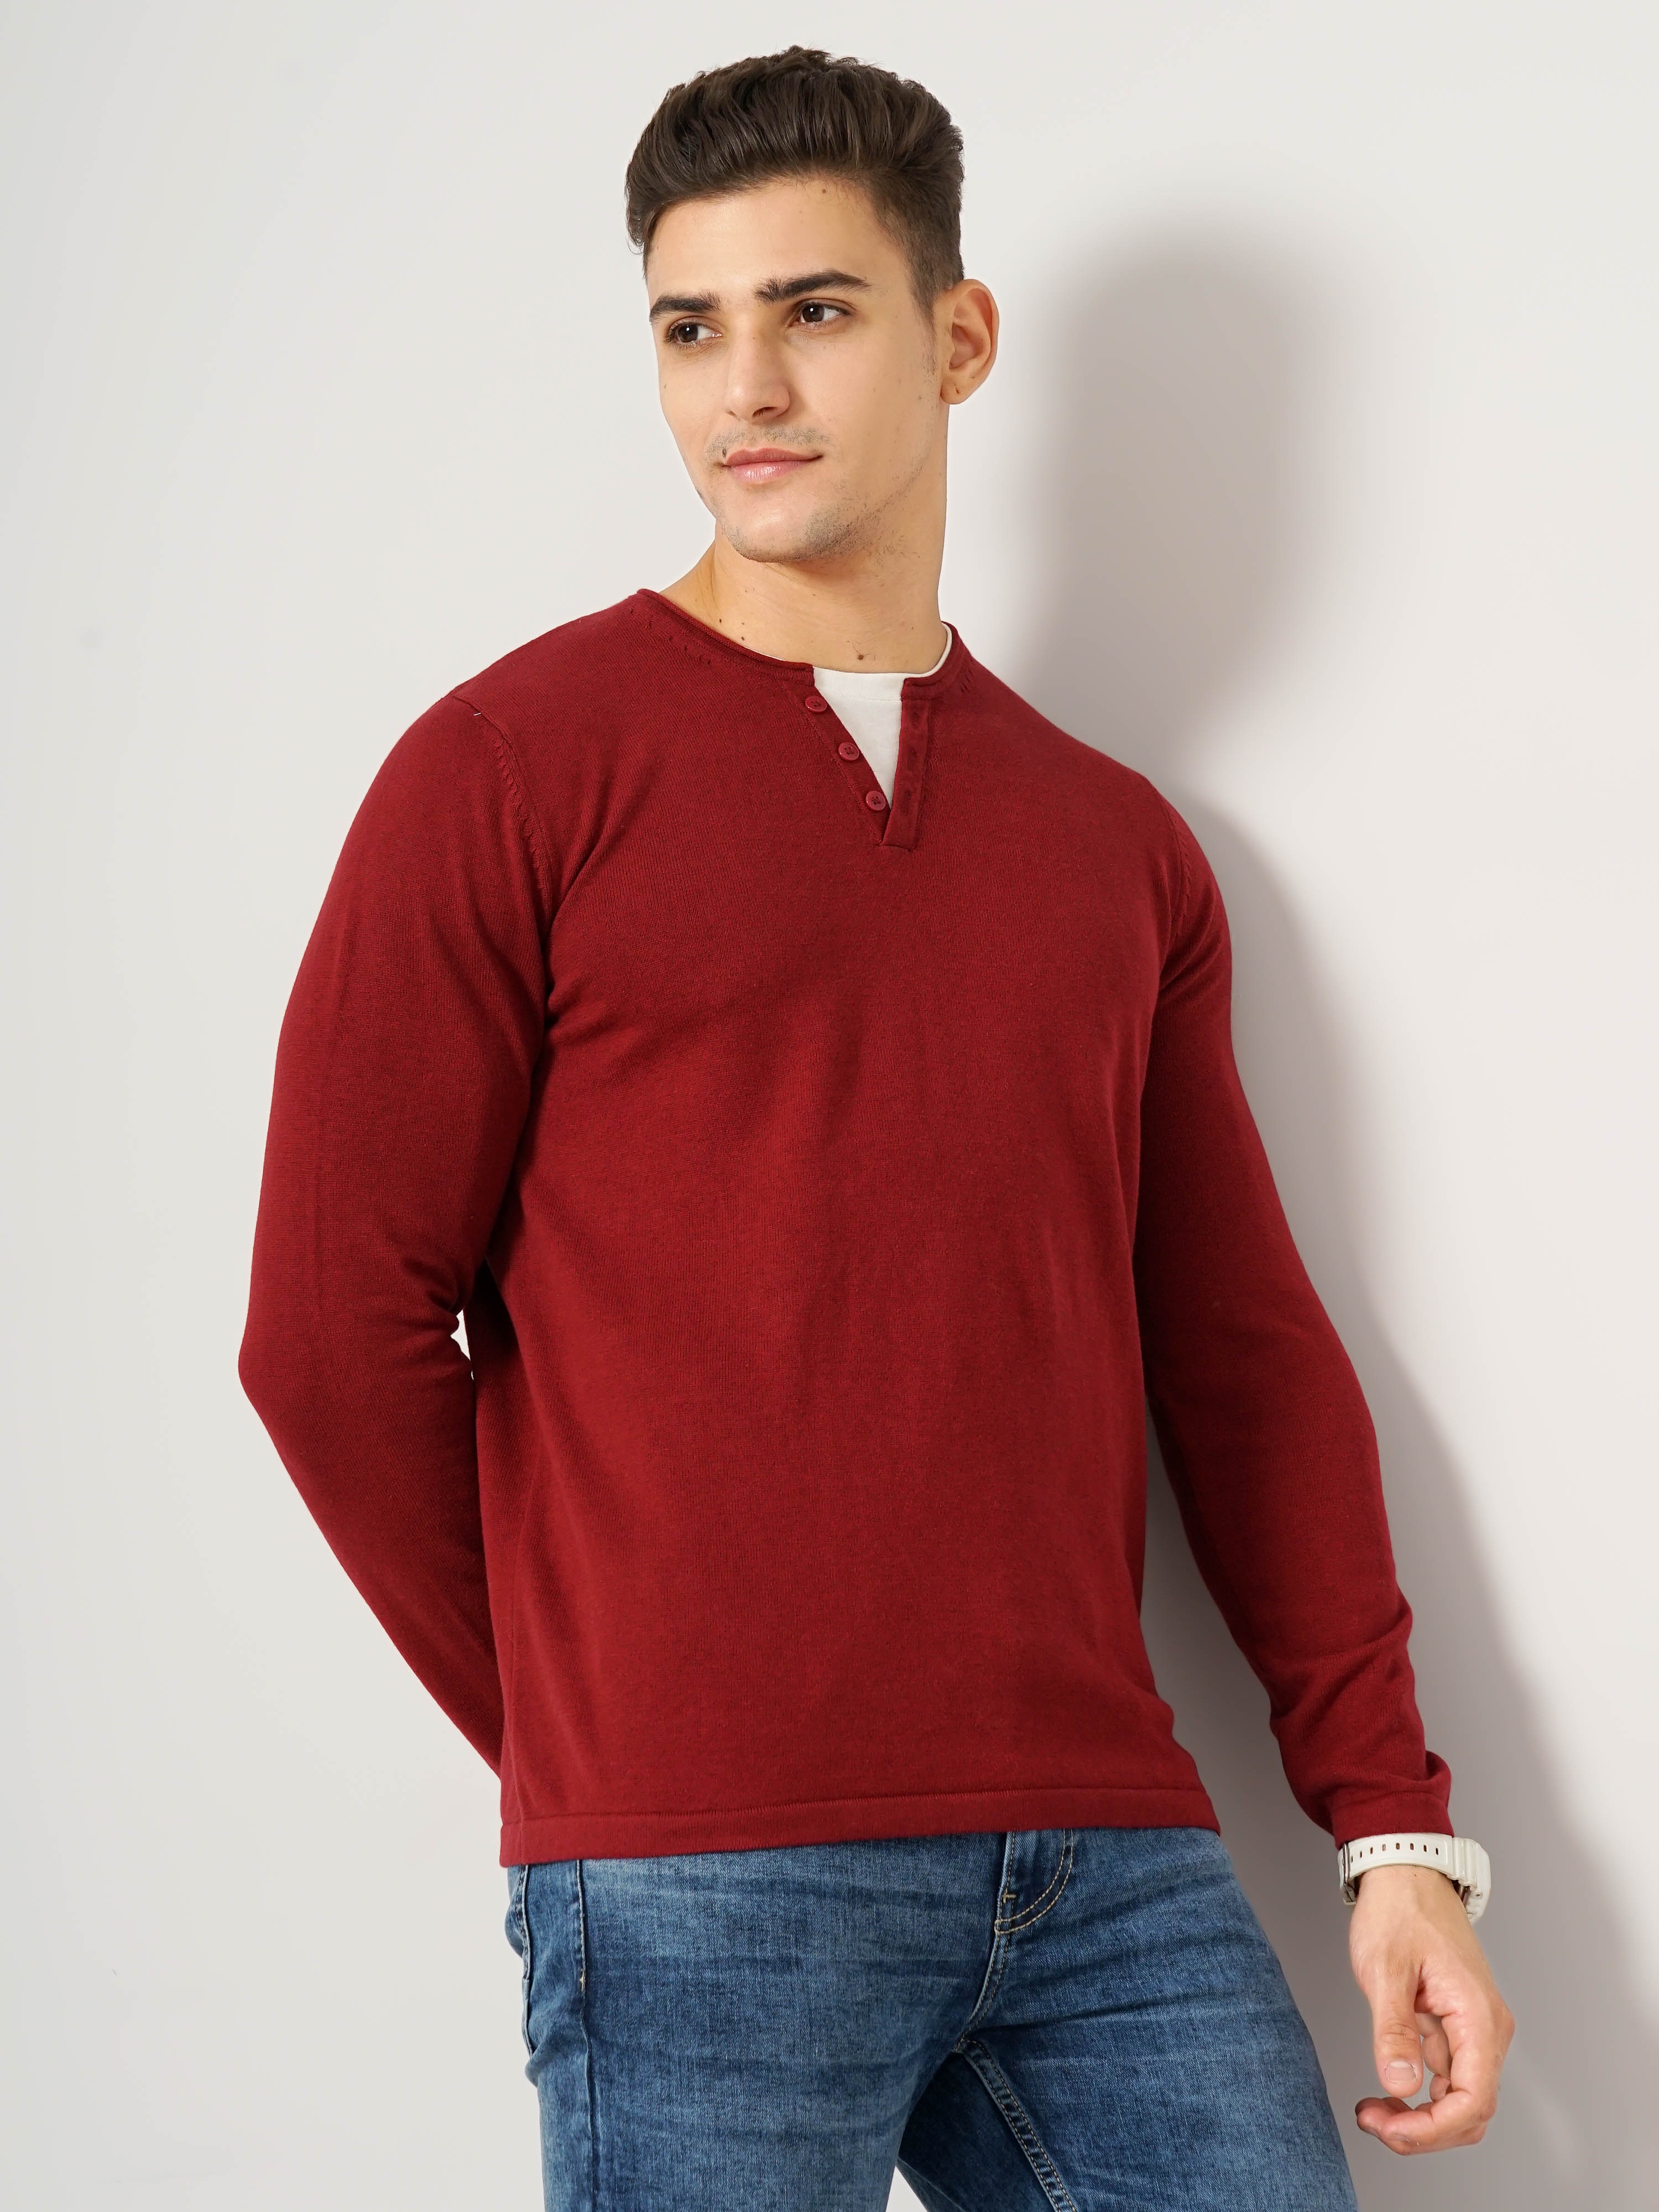 celio | Men's Red Knitted Sweaters